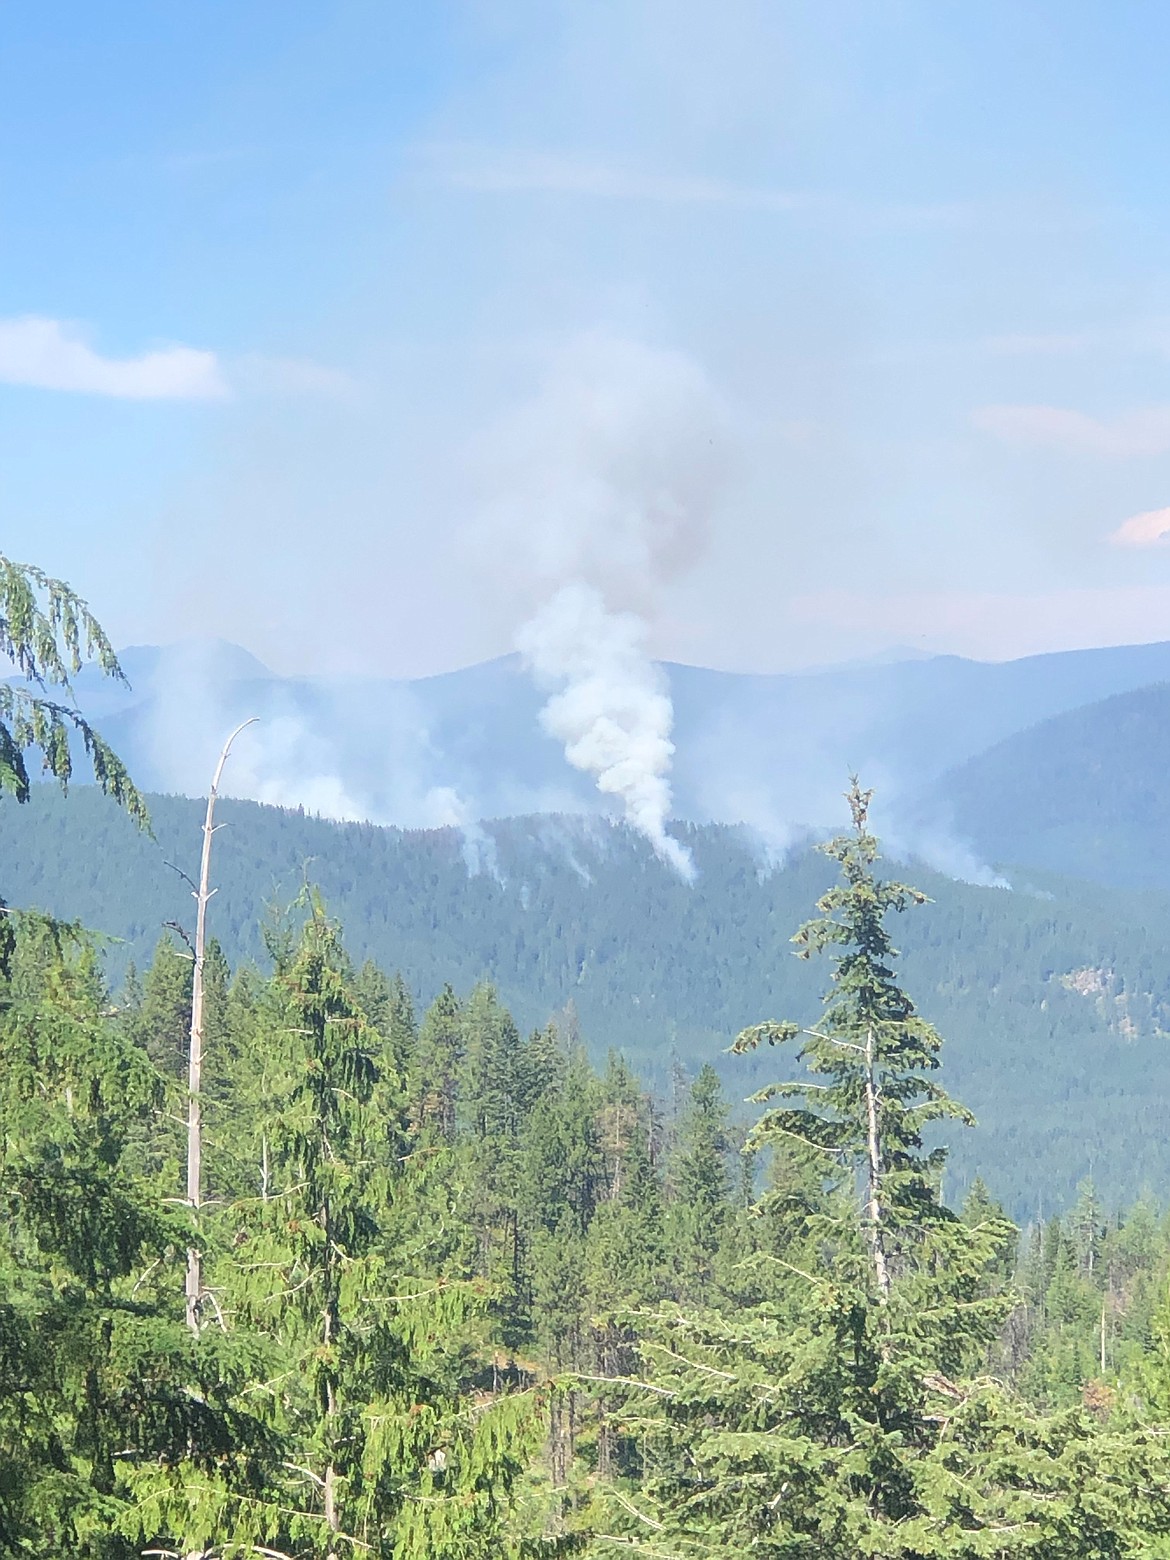 Smoke from the Diamond Watch Fire can be seen from the Priest Lake area. the fire, now at 120 acres, is burning in Pend Oreille County, Wash.